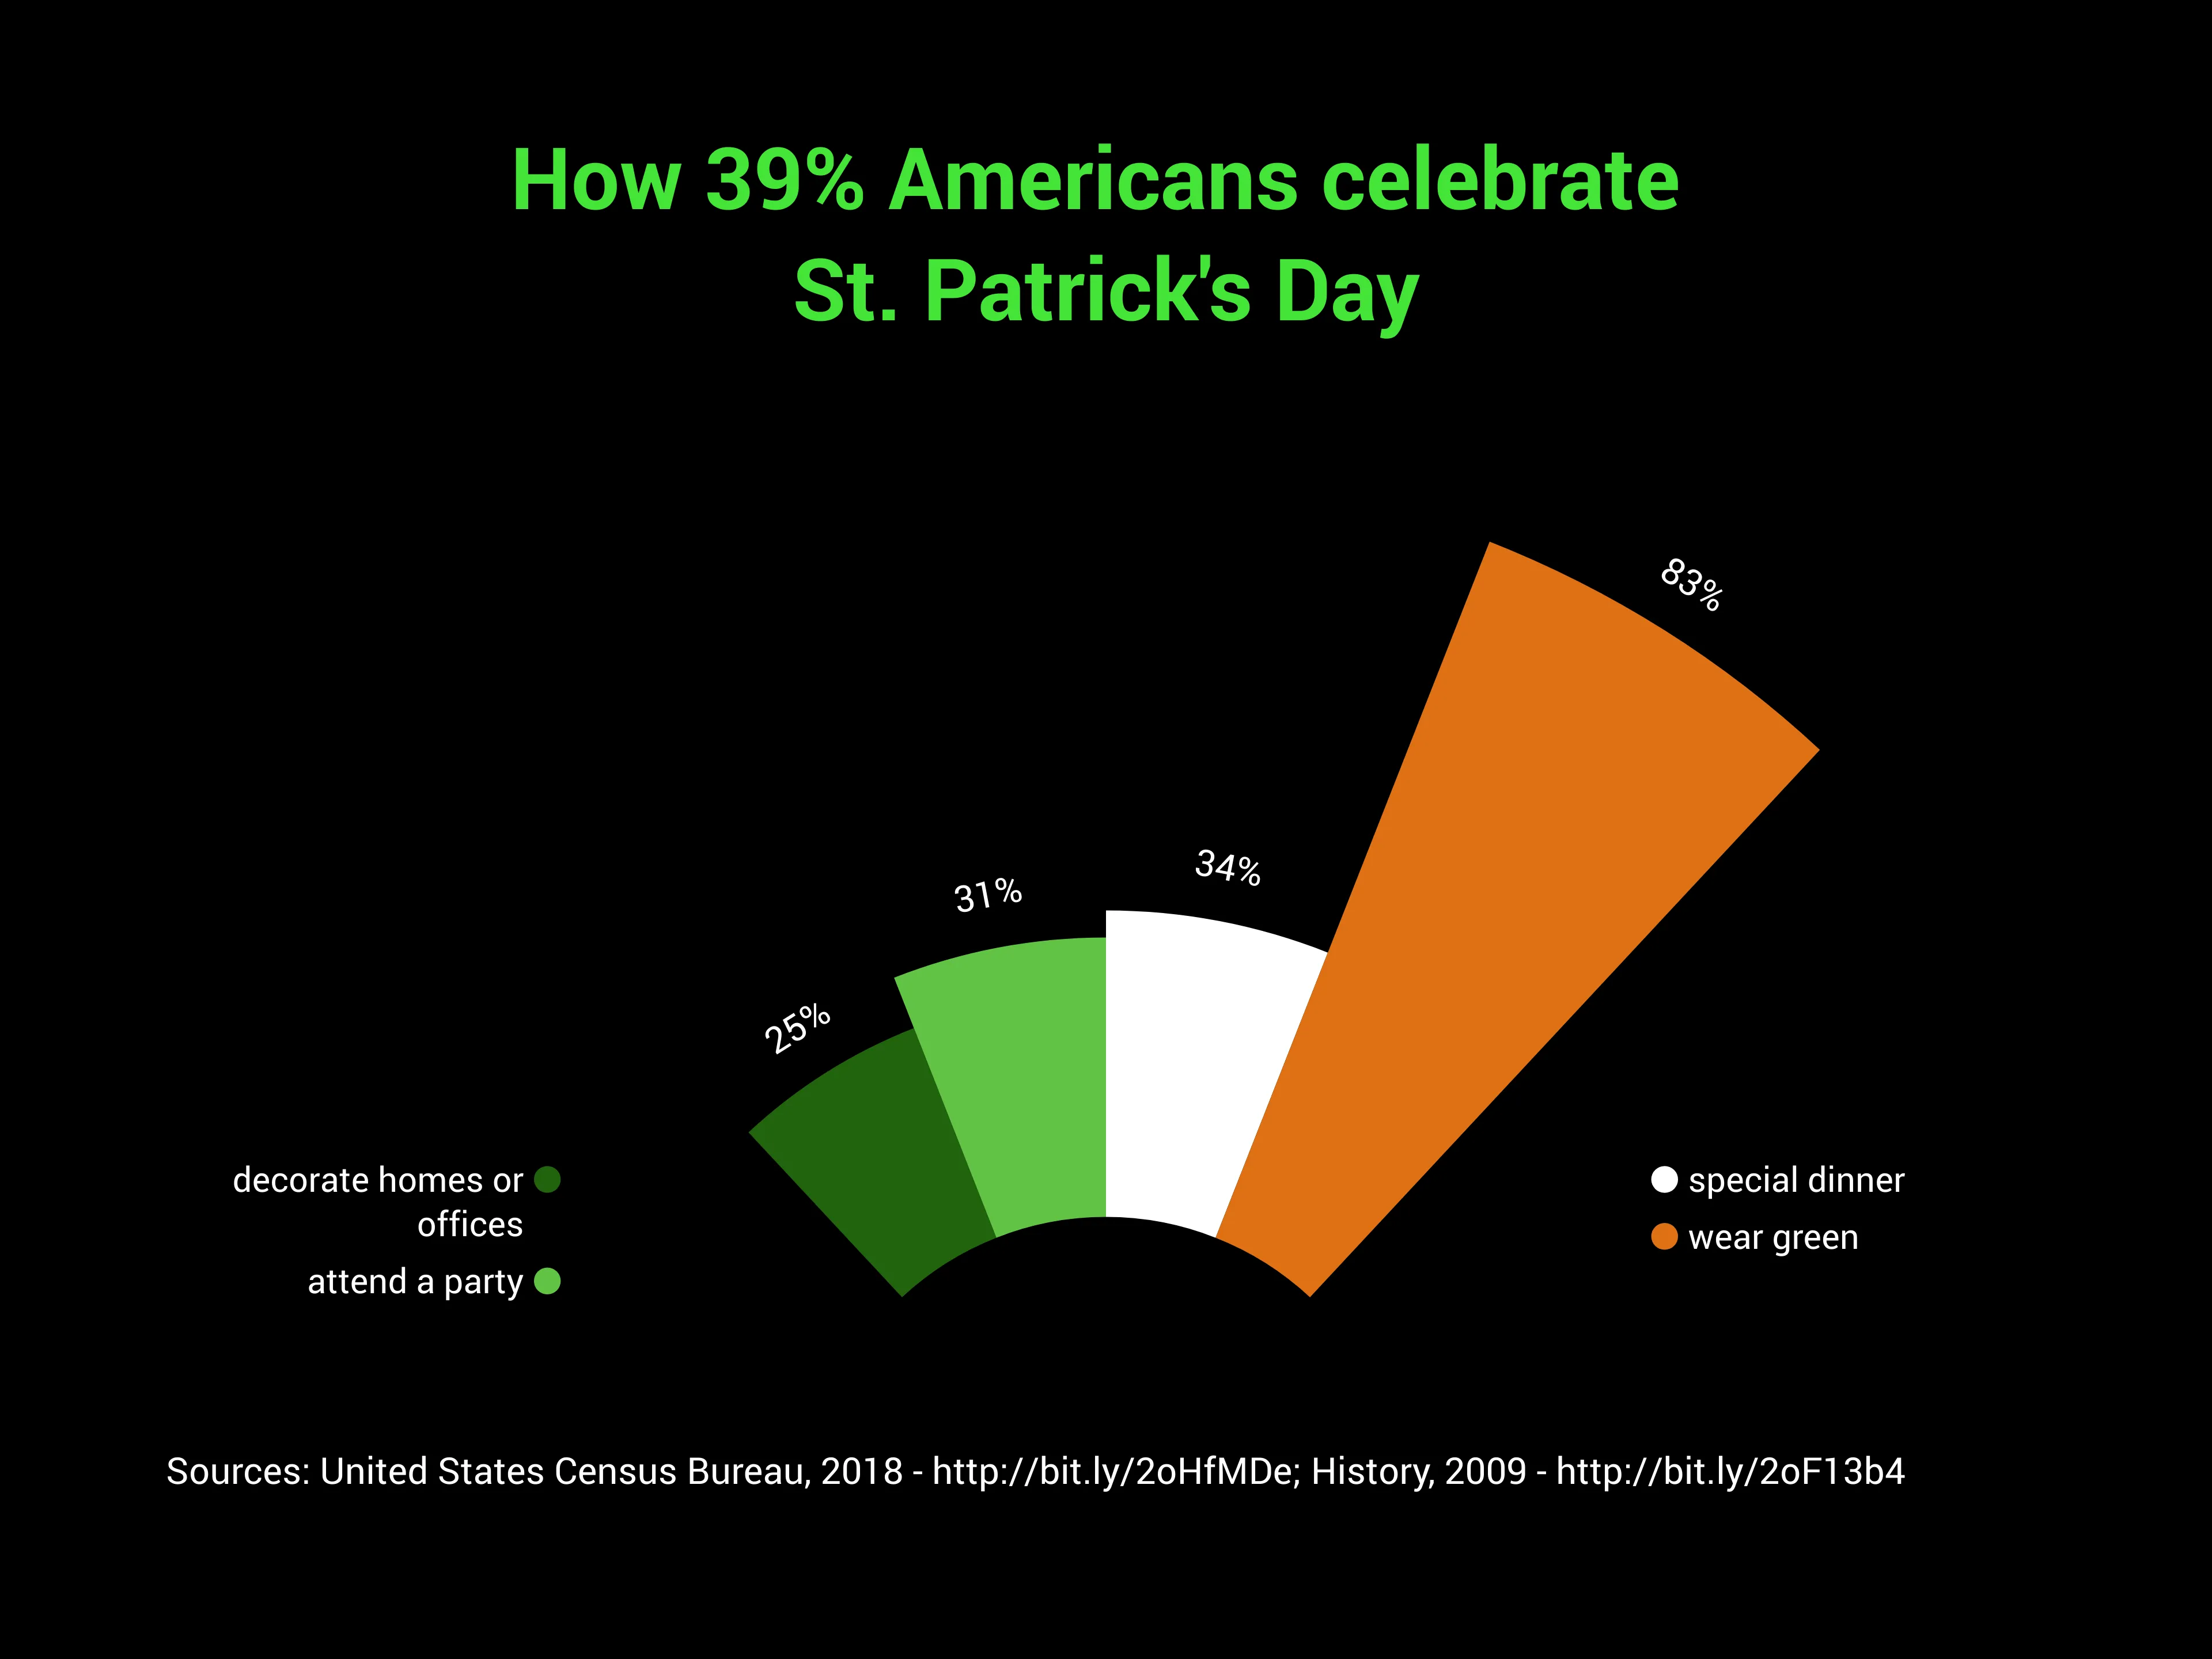 How 39% Americans celebrate  St. Patrick's Day